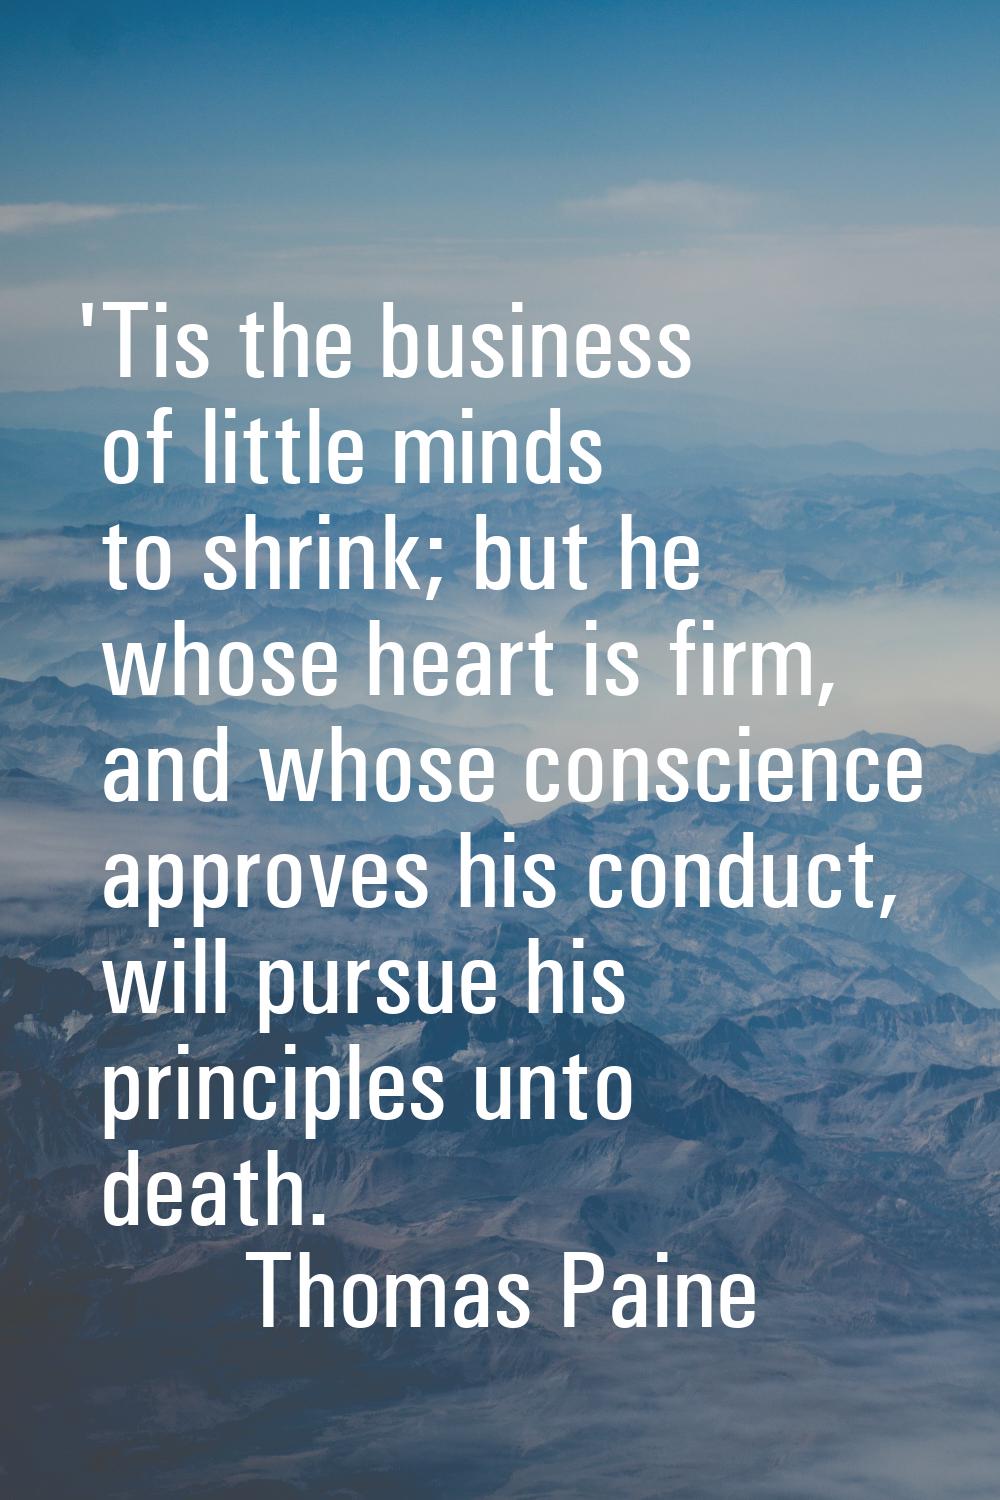 'Tis the business of little minds to shrink; but he whose heart is firm, and whose conscience appro